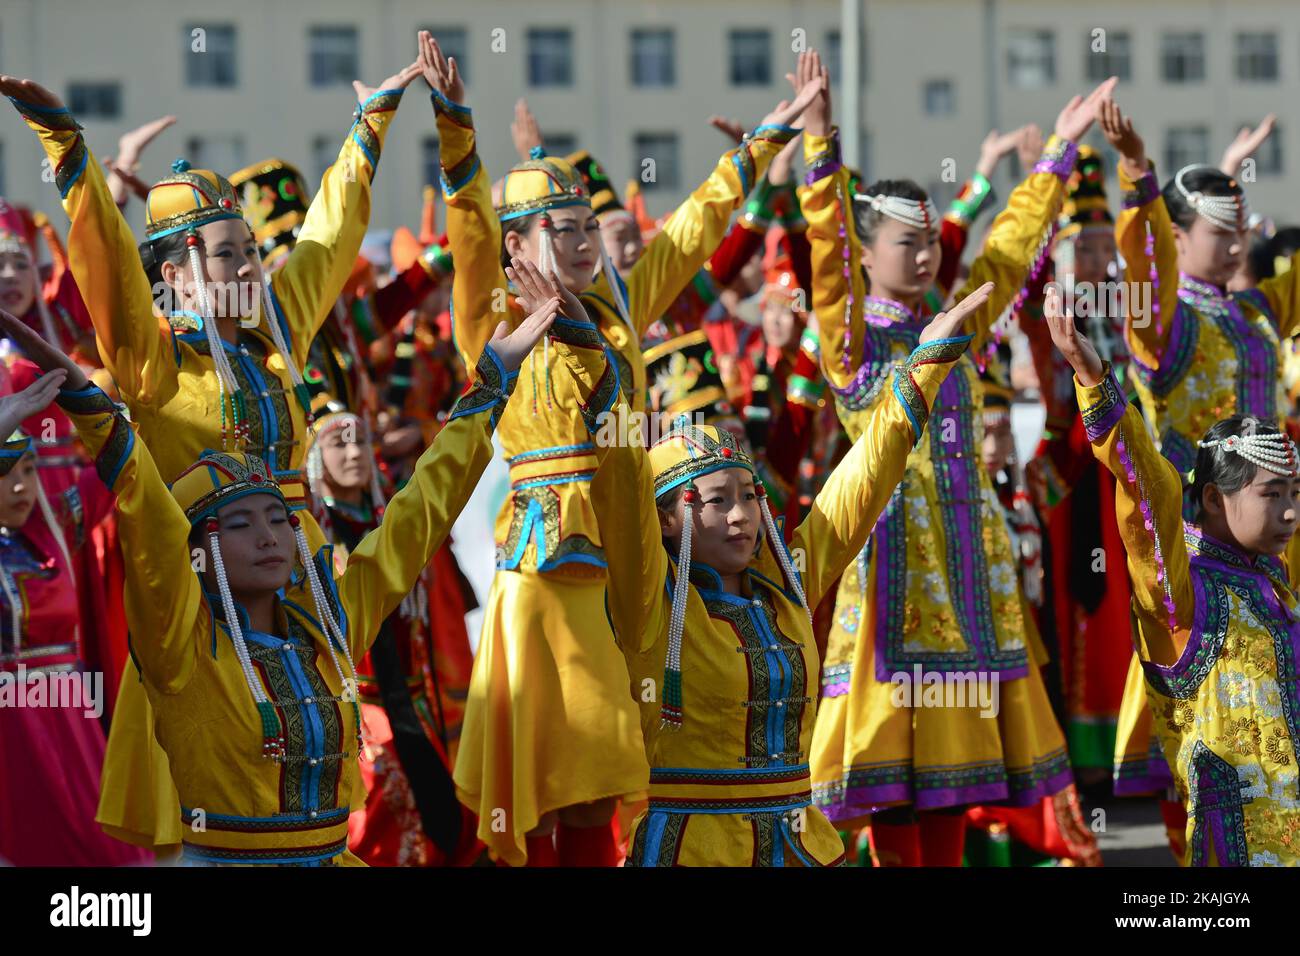 Local girls in traditional costumes perform a dance during the opening ceremony of the second stage, 157.8 km Weichang-Fengning, of the 2016 Tour of China 1. The second stage of the Tour of China starts in Yudaokou, in Weichang county, located at the far northeastern Hebei province. The area has been historically home to Manchu soldiers.  The stage finishes in Fengning county, in front of Great Khan palace on north grassland of the country. On Saturday, 9 September 2016, in Fengning, China. *** Please Use Credit from Credit Field *** Stock Photo